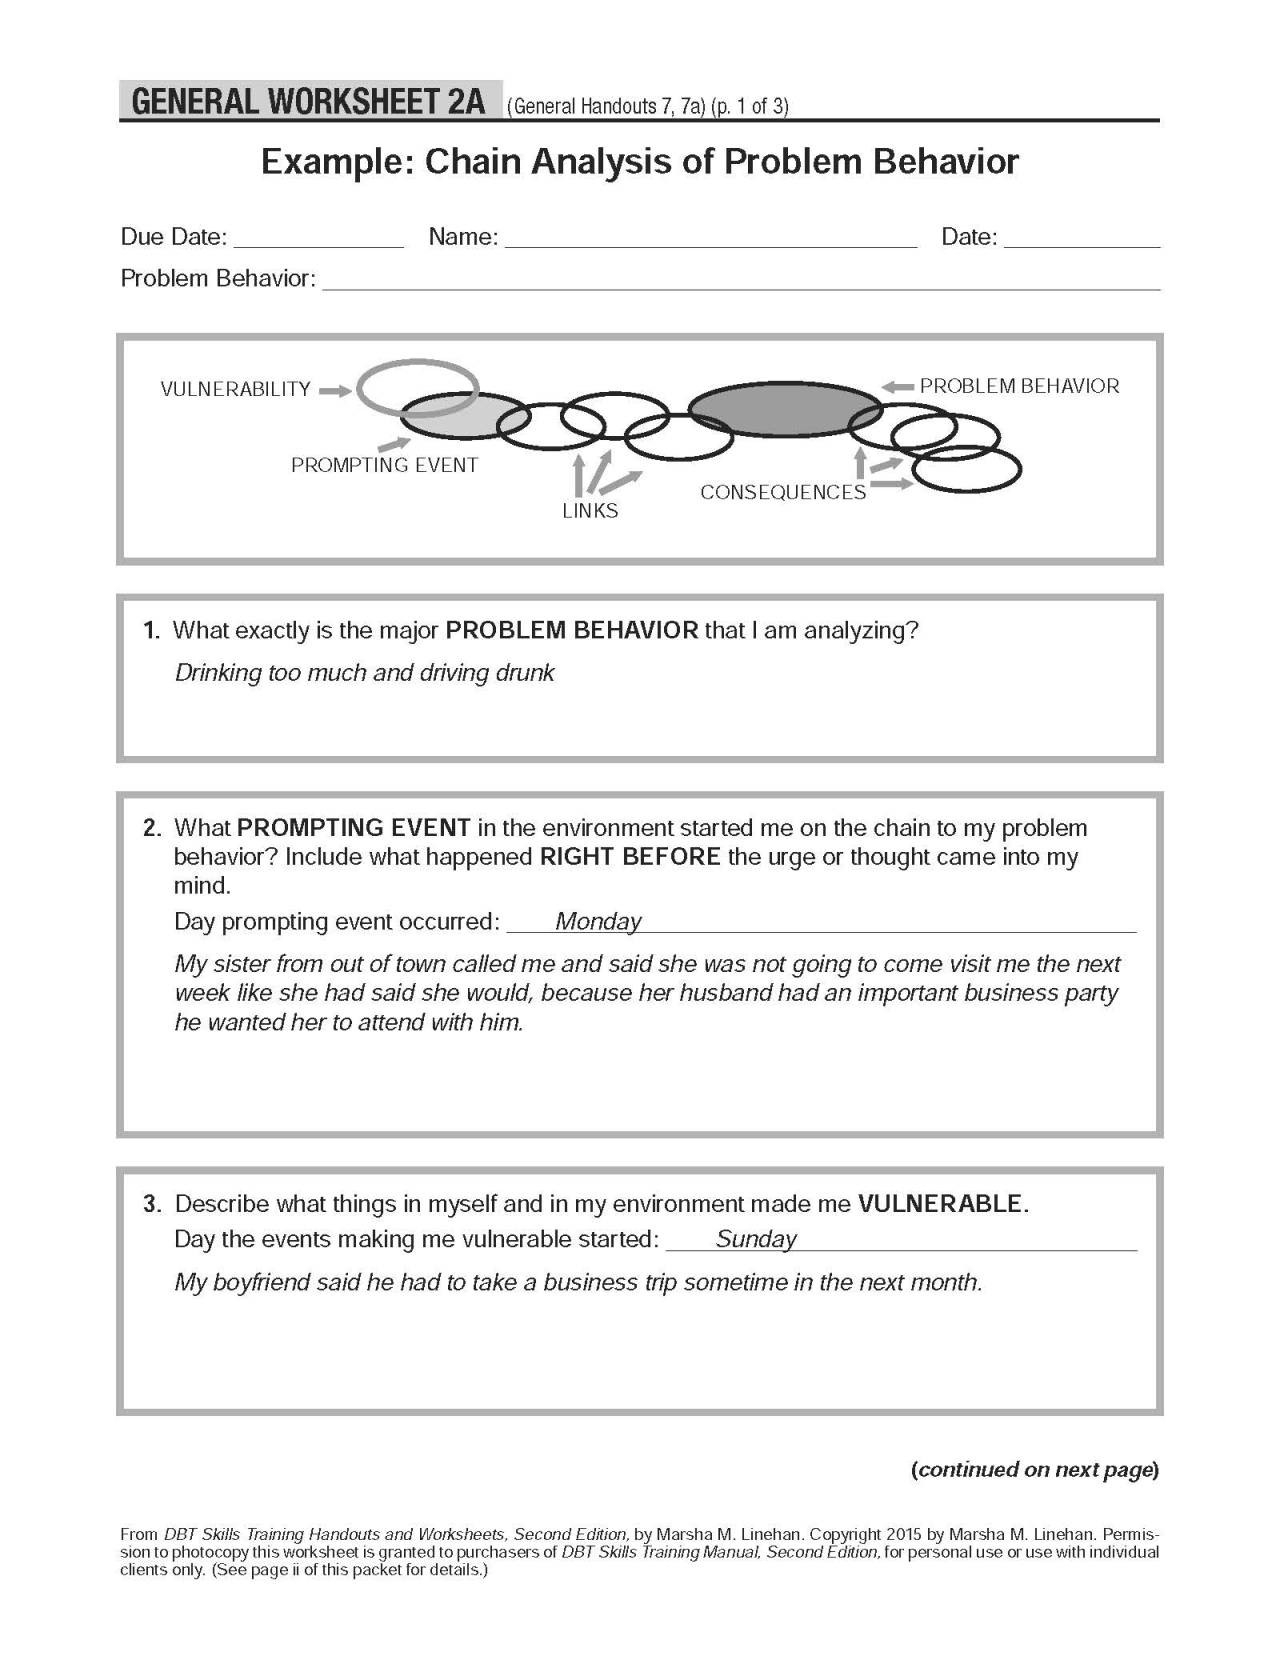 dbt skills training handouts and worksheets free download